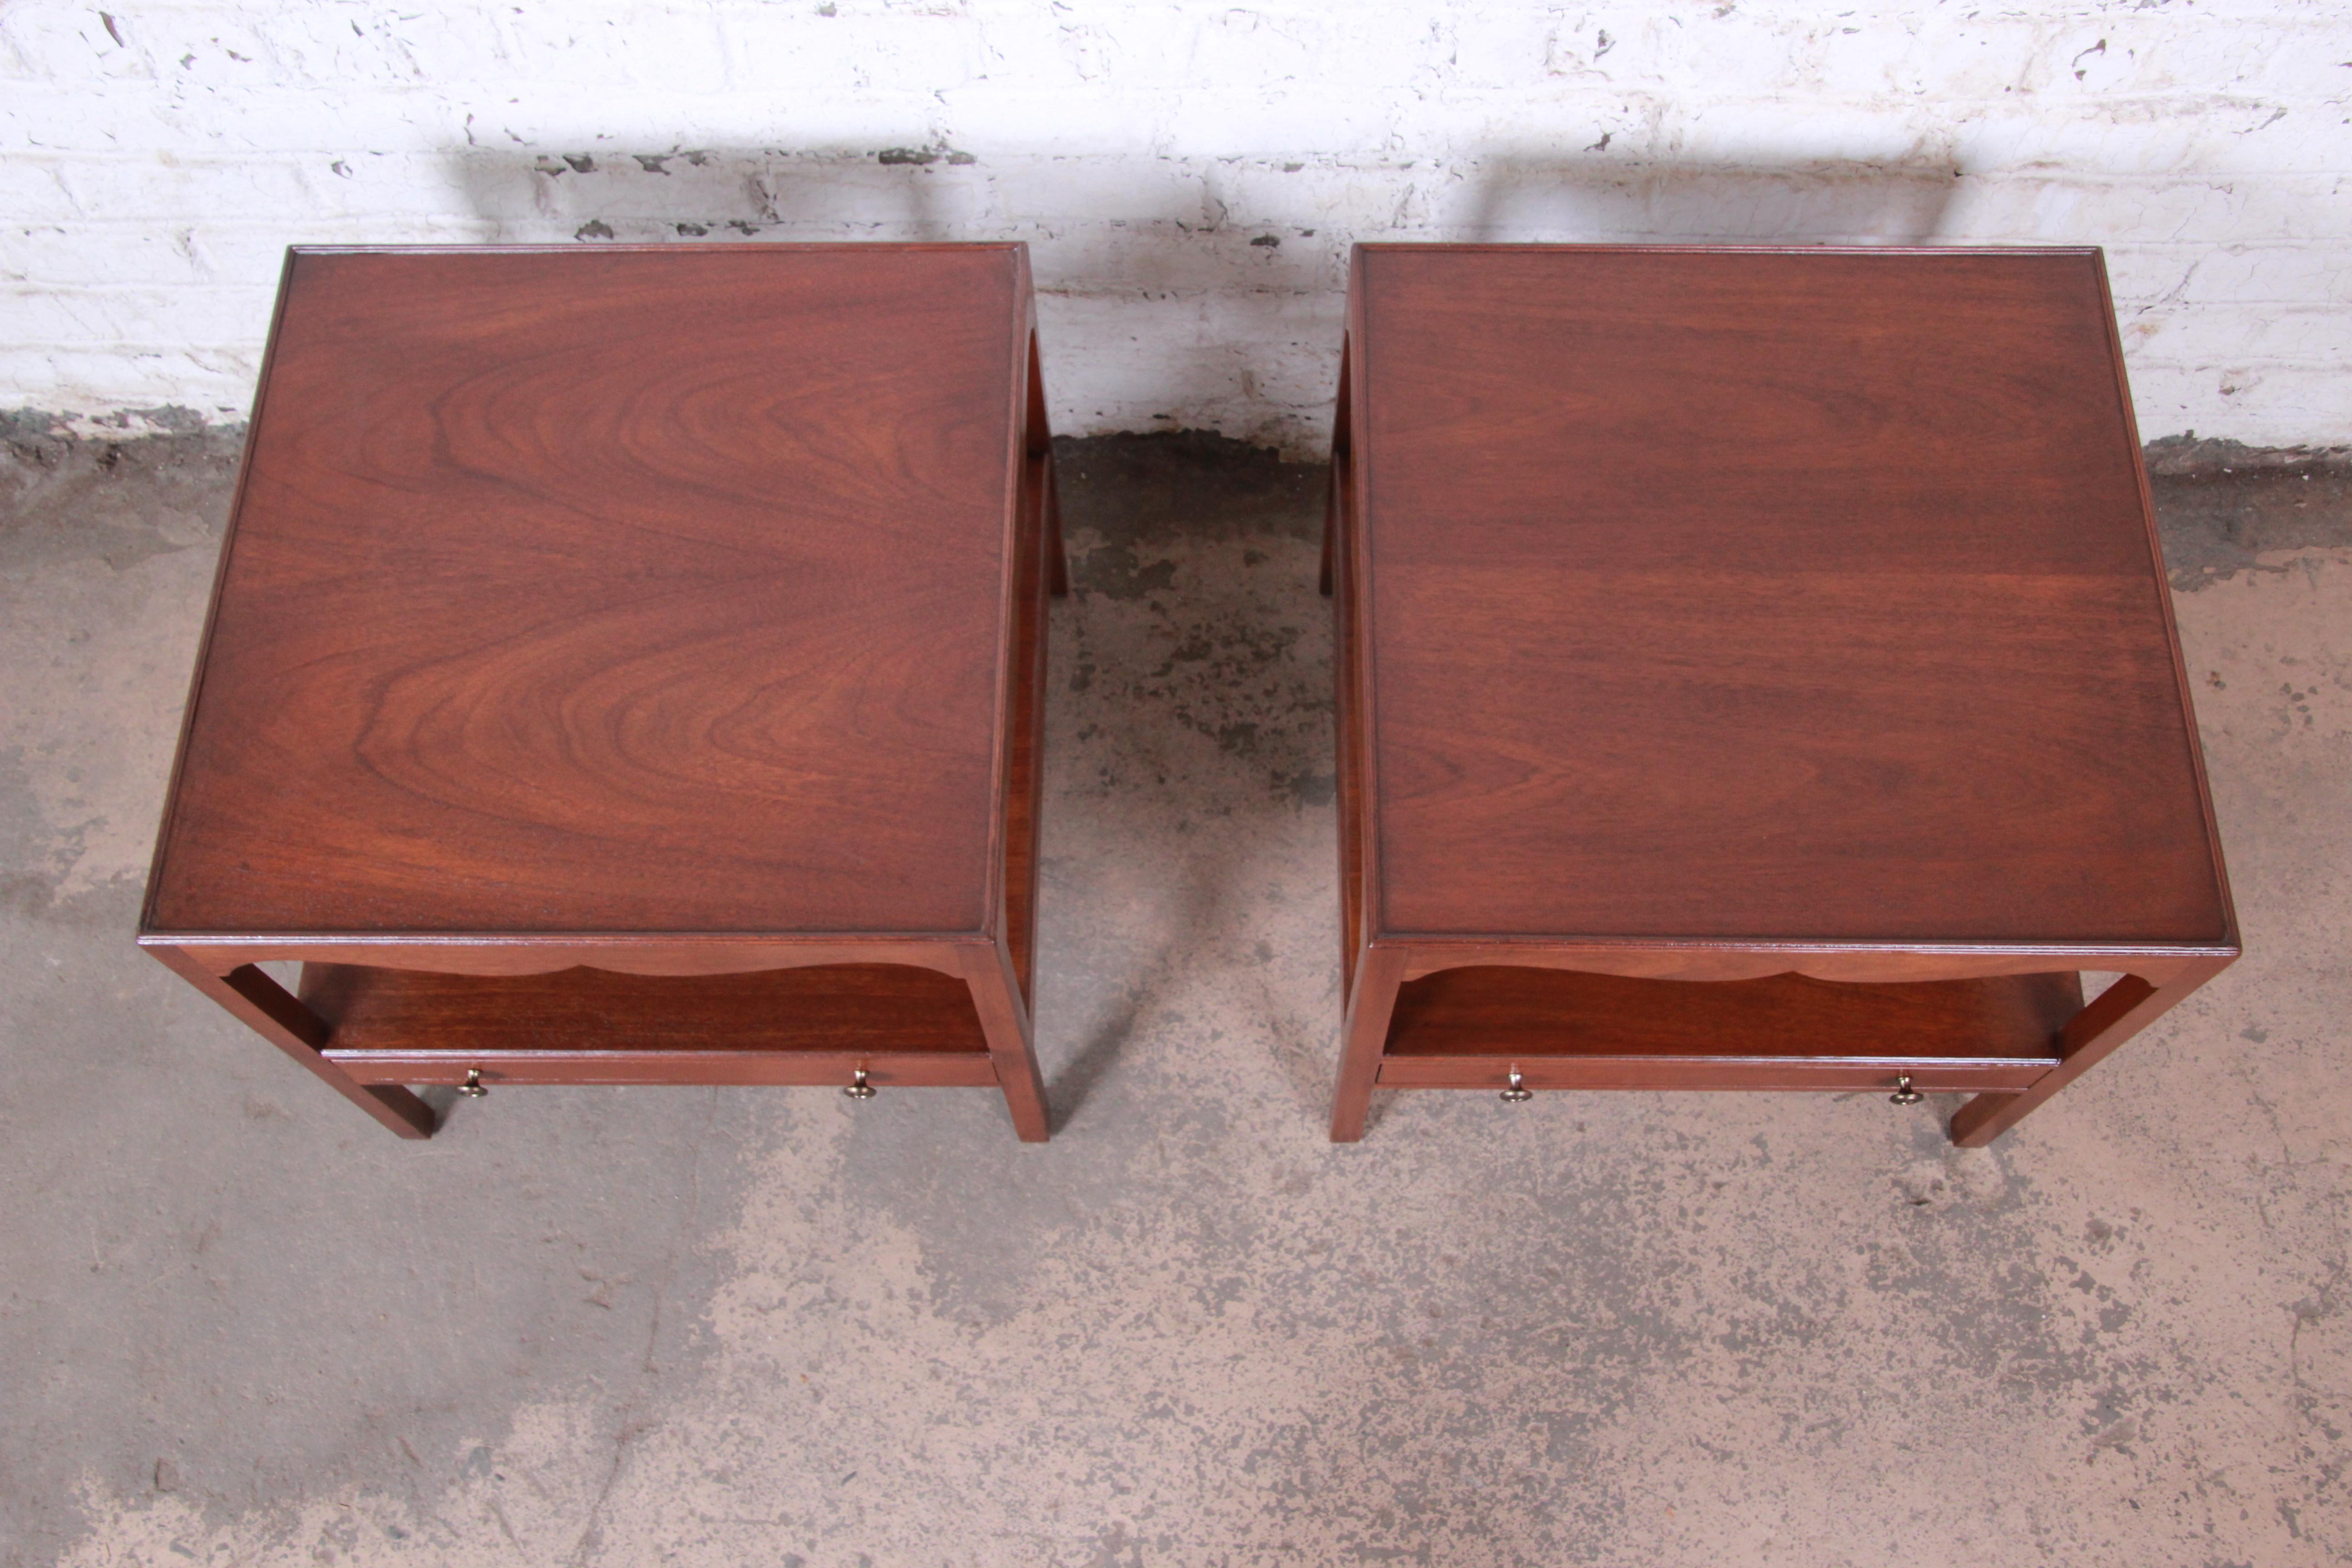 20th Century Kittinger American Colonial Walnut End Tables or Nightstands, Newly Restored